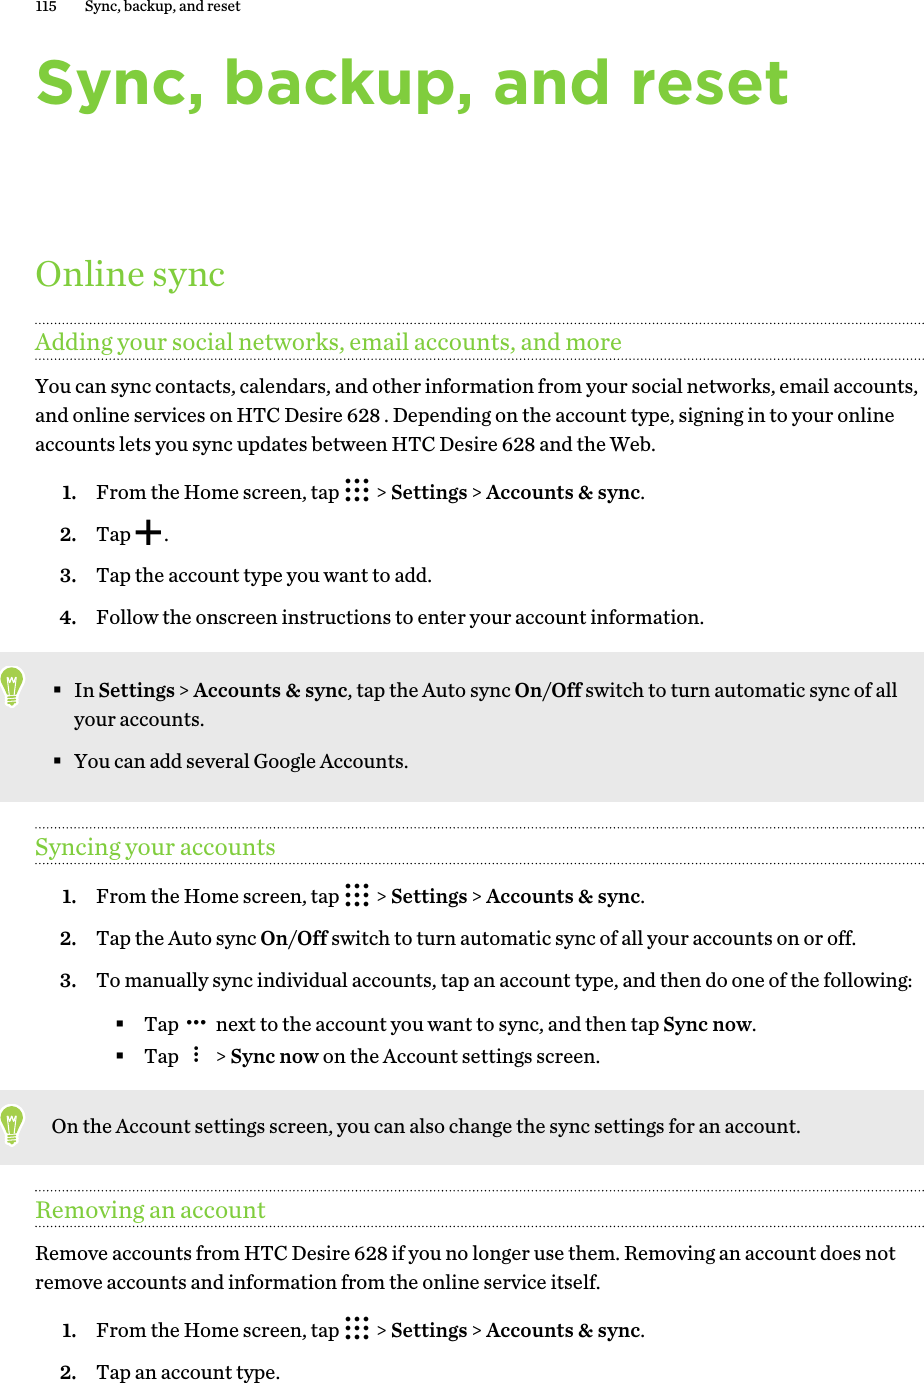 Sync, backup, and resetOnline syncAdding your social networks, email accounts, and moreYou can sync contacts, calendars, and other information from your social networks, email accounts,and online services on HTC Desire 628 . Depending on the account type, signing in to your onlineaccounts lets you sync updates between HTC Desire 628 and the Web.1. From the Home screen, tap   &gt; Settings &gt; Accounts &amp; sync.2. Tap  .3. Tap the account type you want to add.4. Follow the onscreen instructions to enter your account information.§In Settings &gt; Accounts &amp; sync, tap the Auto sync On/Off switch to turn automatic sync of allyour accounts.§You can add several Google Accounts.Syncing your accounts1. From the Home screen, tap   &gt; Settings &gt; Accounts &amp; sync.2. Tap the Auto sync On/Off switch to turn automatic sync of all your accounts on or off.3. To manually sync individual accounts, tap an account type, and then do one of the following:§Tap   next to the account you want to sync, and then tap Sync now.§Tap   &gt; Sync now on the Account settings screen.On the Account settings screen, you can also change the sync settings for an account.Removing an accountRemove accounts from HTC Desire 628 if you no longer use them. Removing an account does notremove accounts and information from the online service itself.1. From the Home screen, tap   &gt; Settings &gt; Accounts &amp; sync.2. Tap an account type.115 Sync, backup, and reset